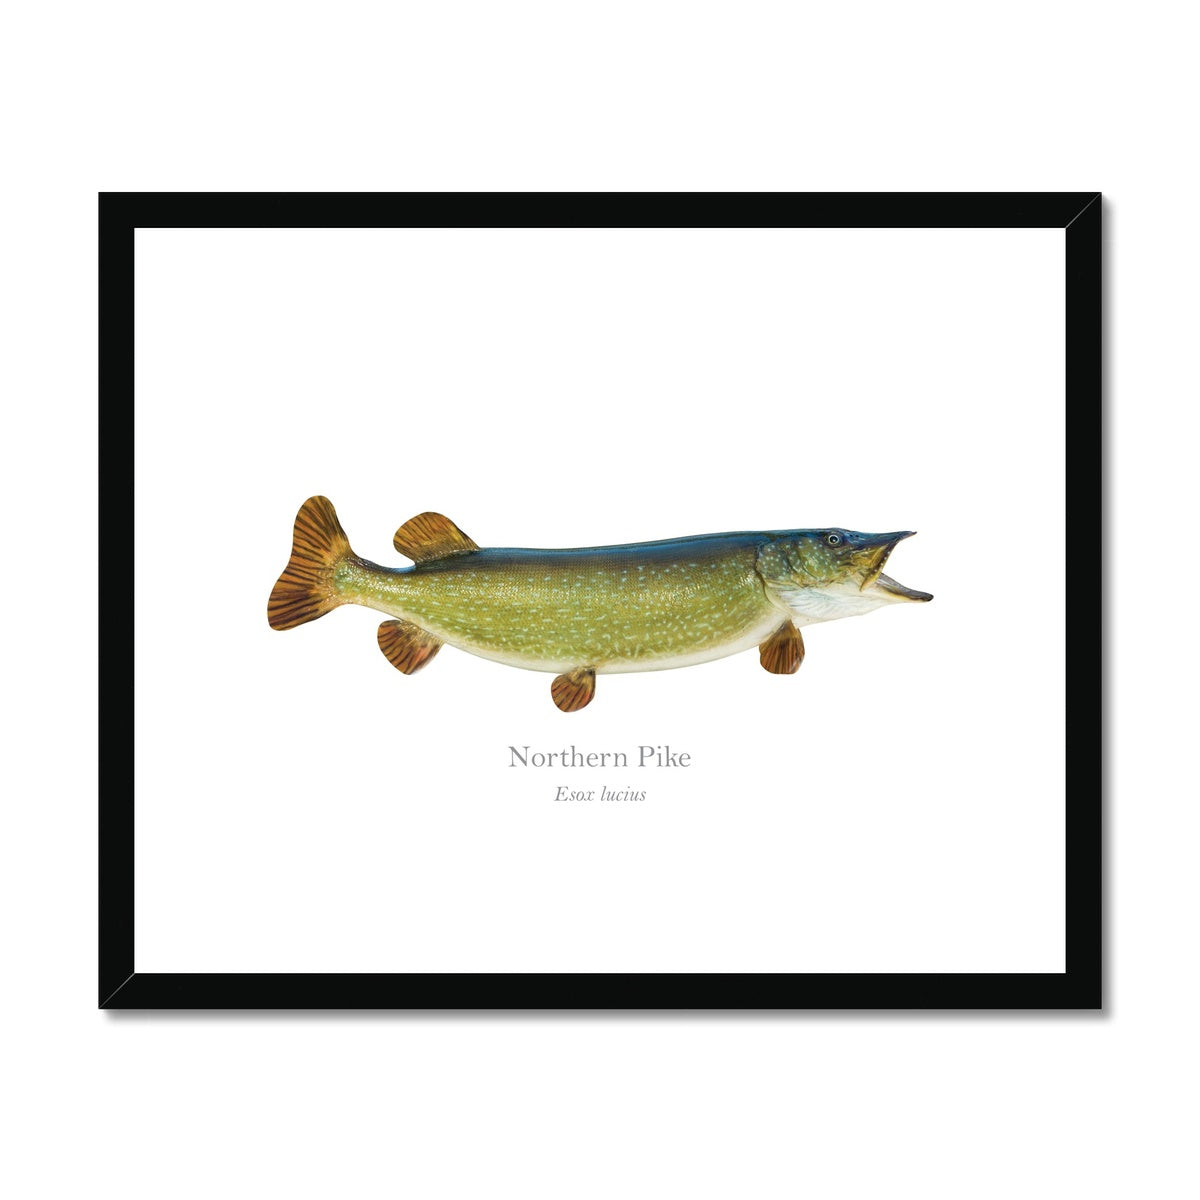 Northern Pike - Framed & Mounted Print - With Scientific Name